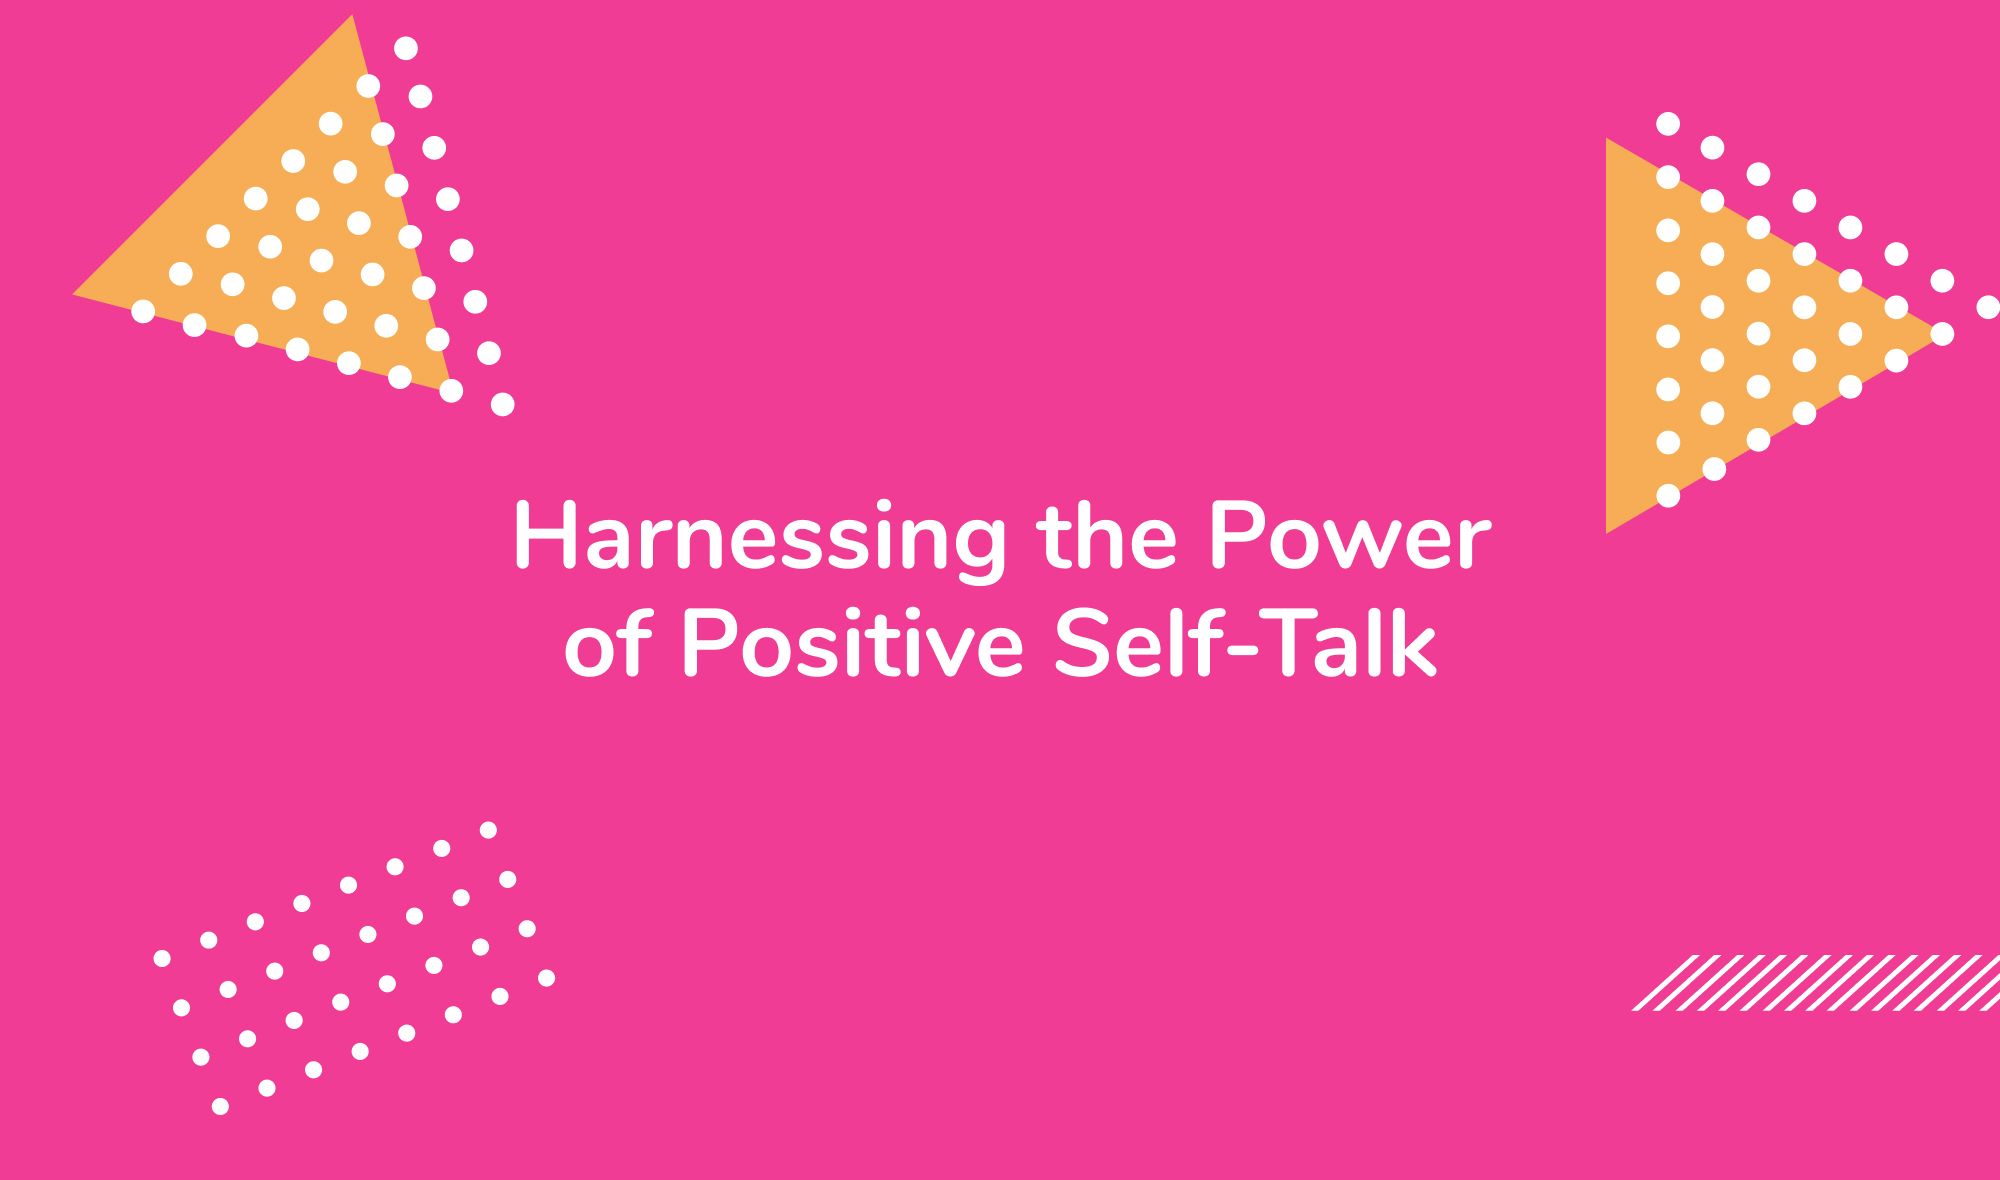 Harnessing the Power of Positive Self-Talk